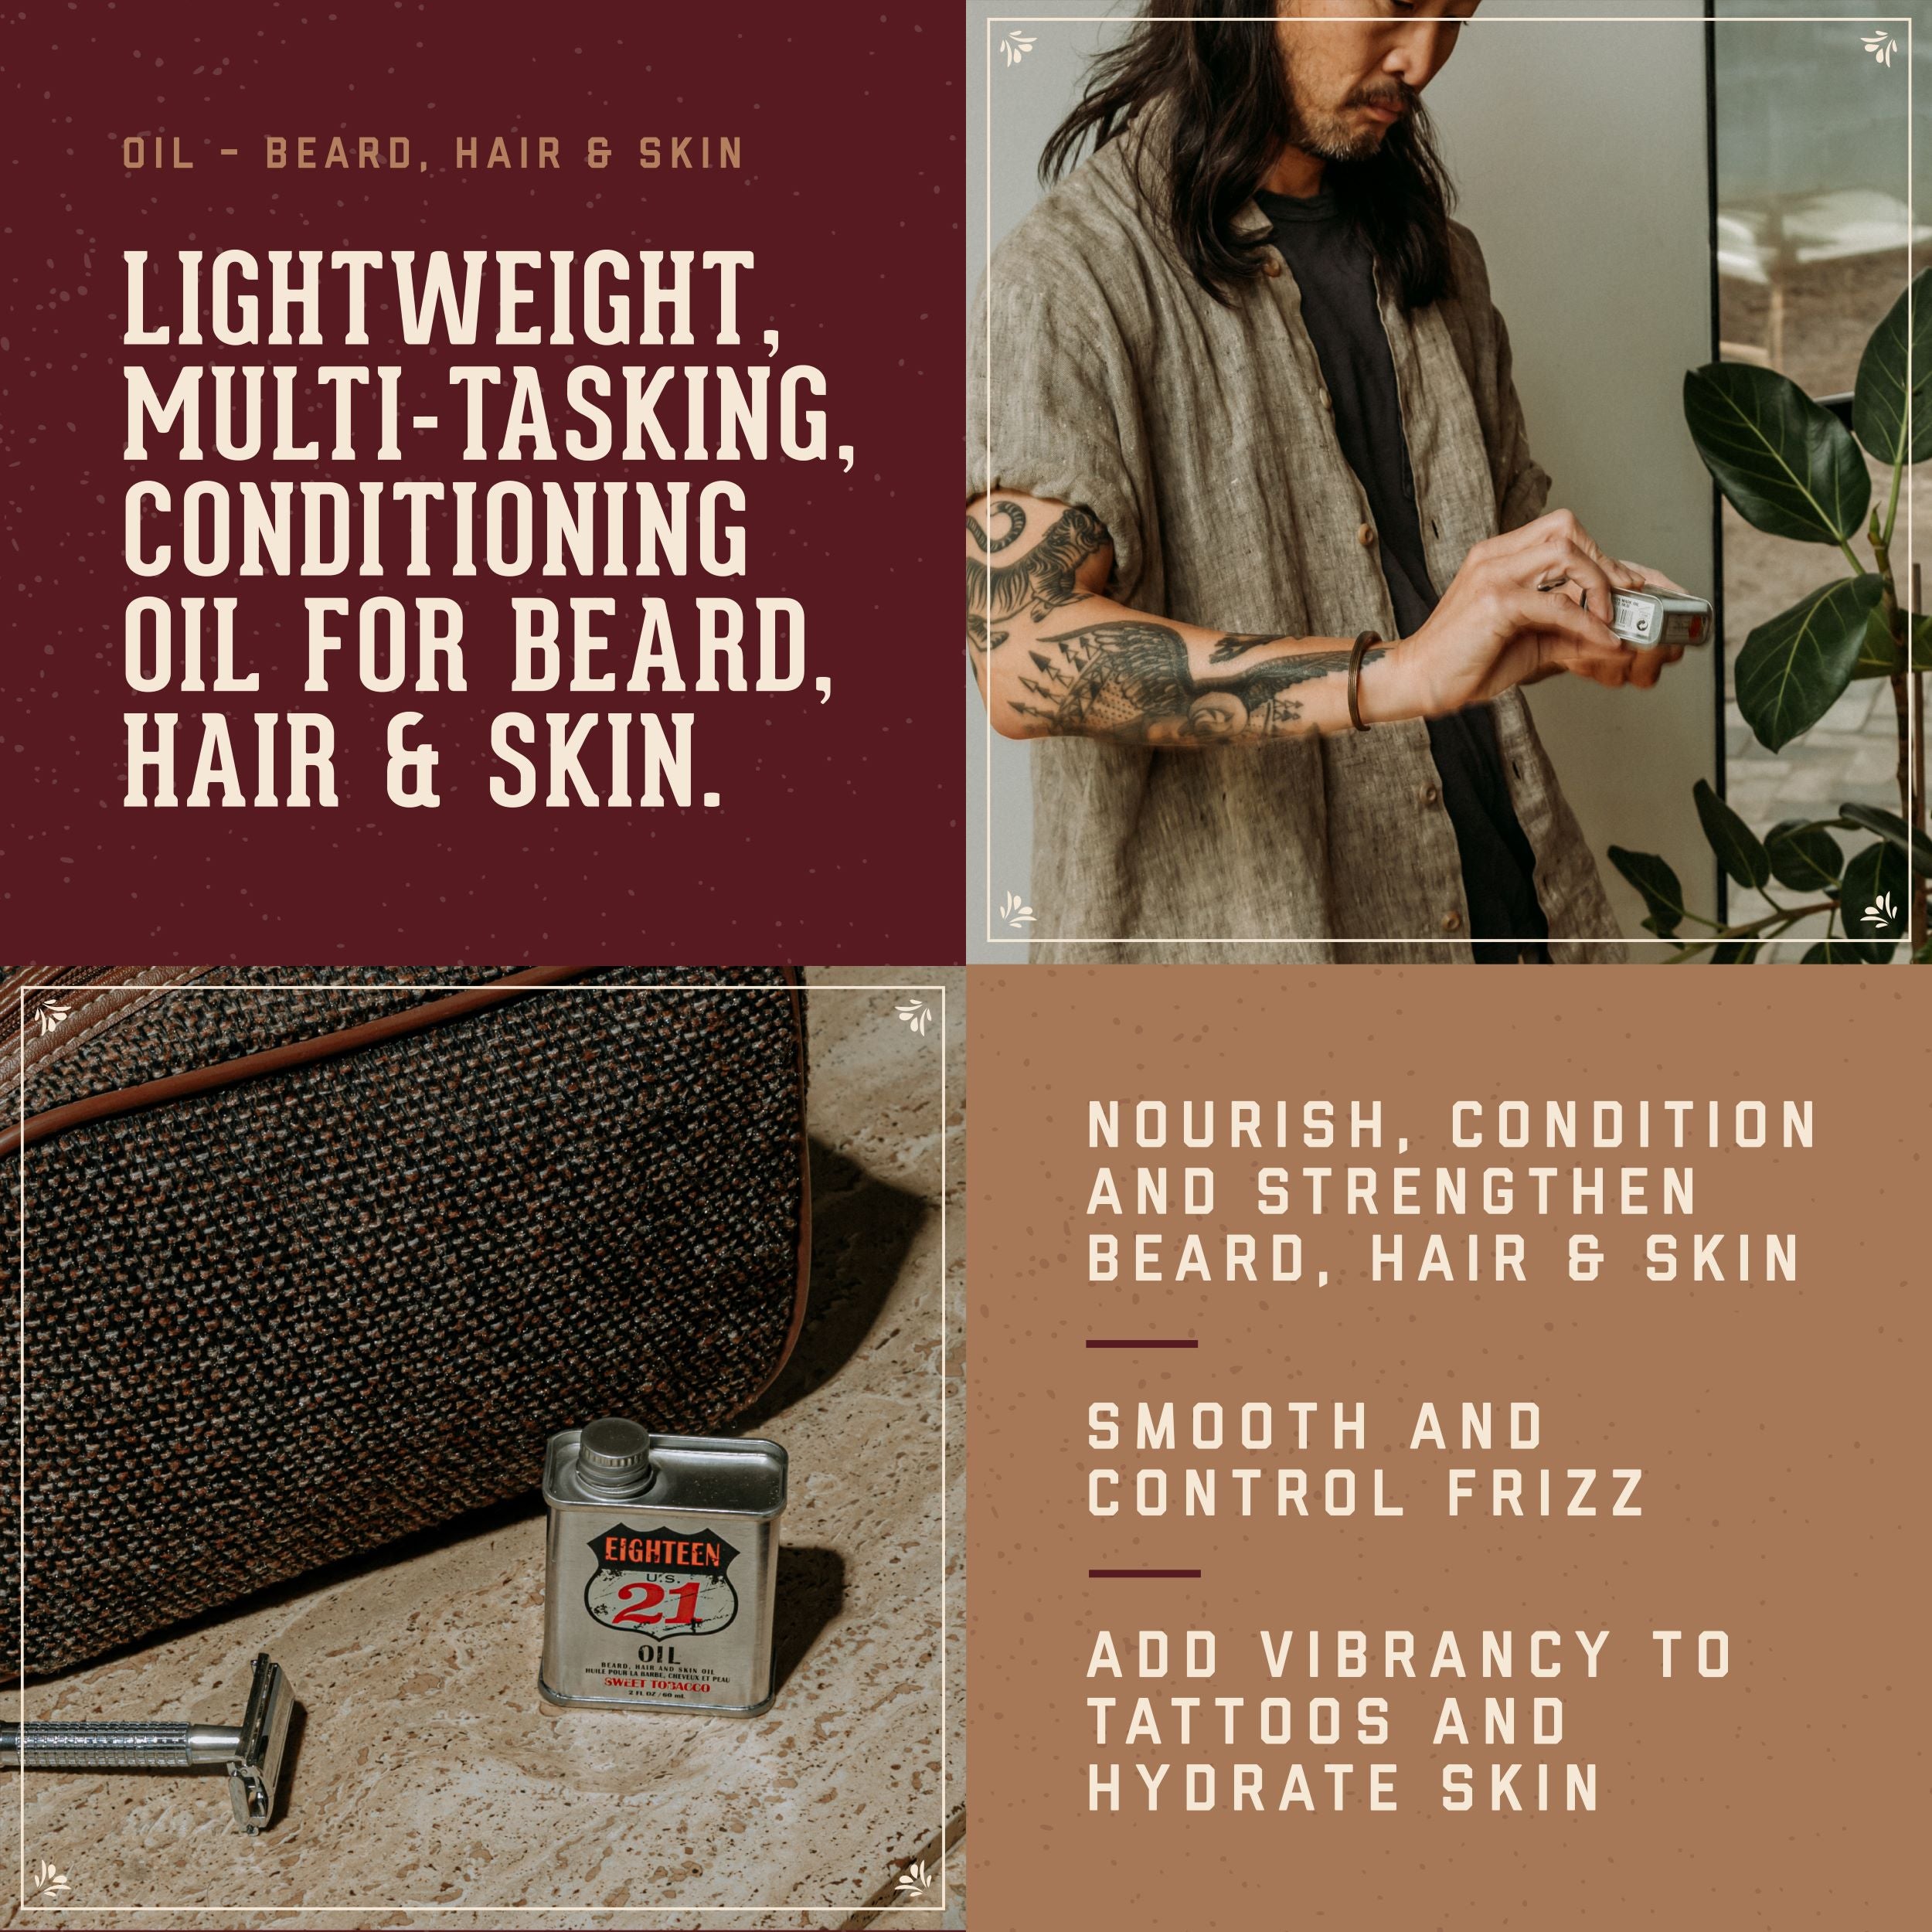 18.21 Man Made oil Benefits. Leightweight, multi-tasking conditioning oil for beard, hair and skin. Nourish, condition and stregthen beard and hair. Smooth and control frizz. Add vibrancy to tatoos and hydrate skin.